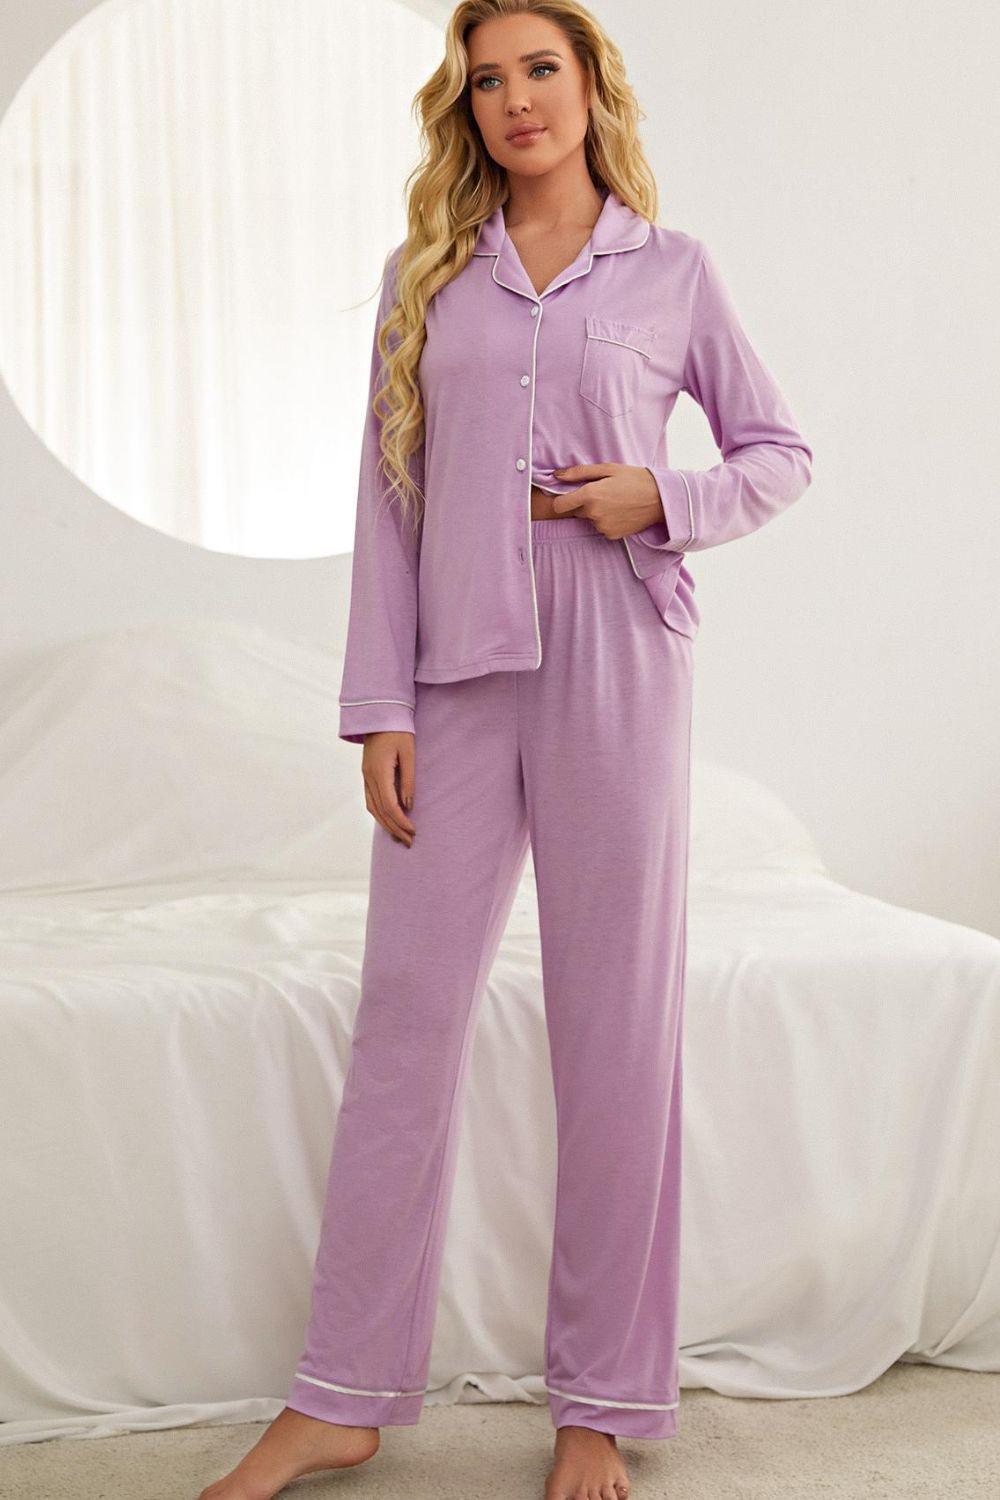 Contrast Piping Button Down Top and Pants Loungewear Set - Lab Fashion, Home & Health